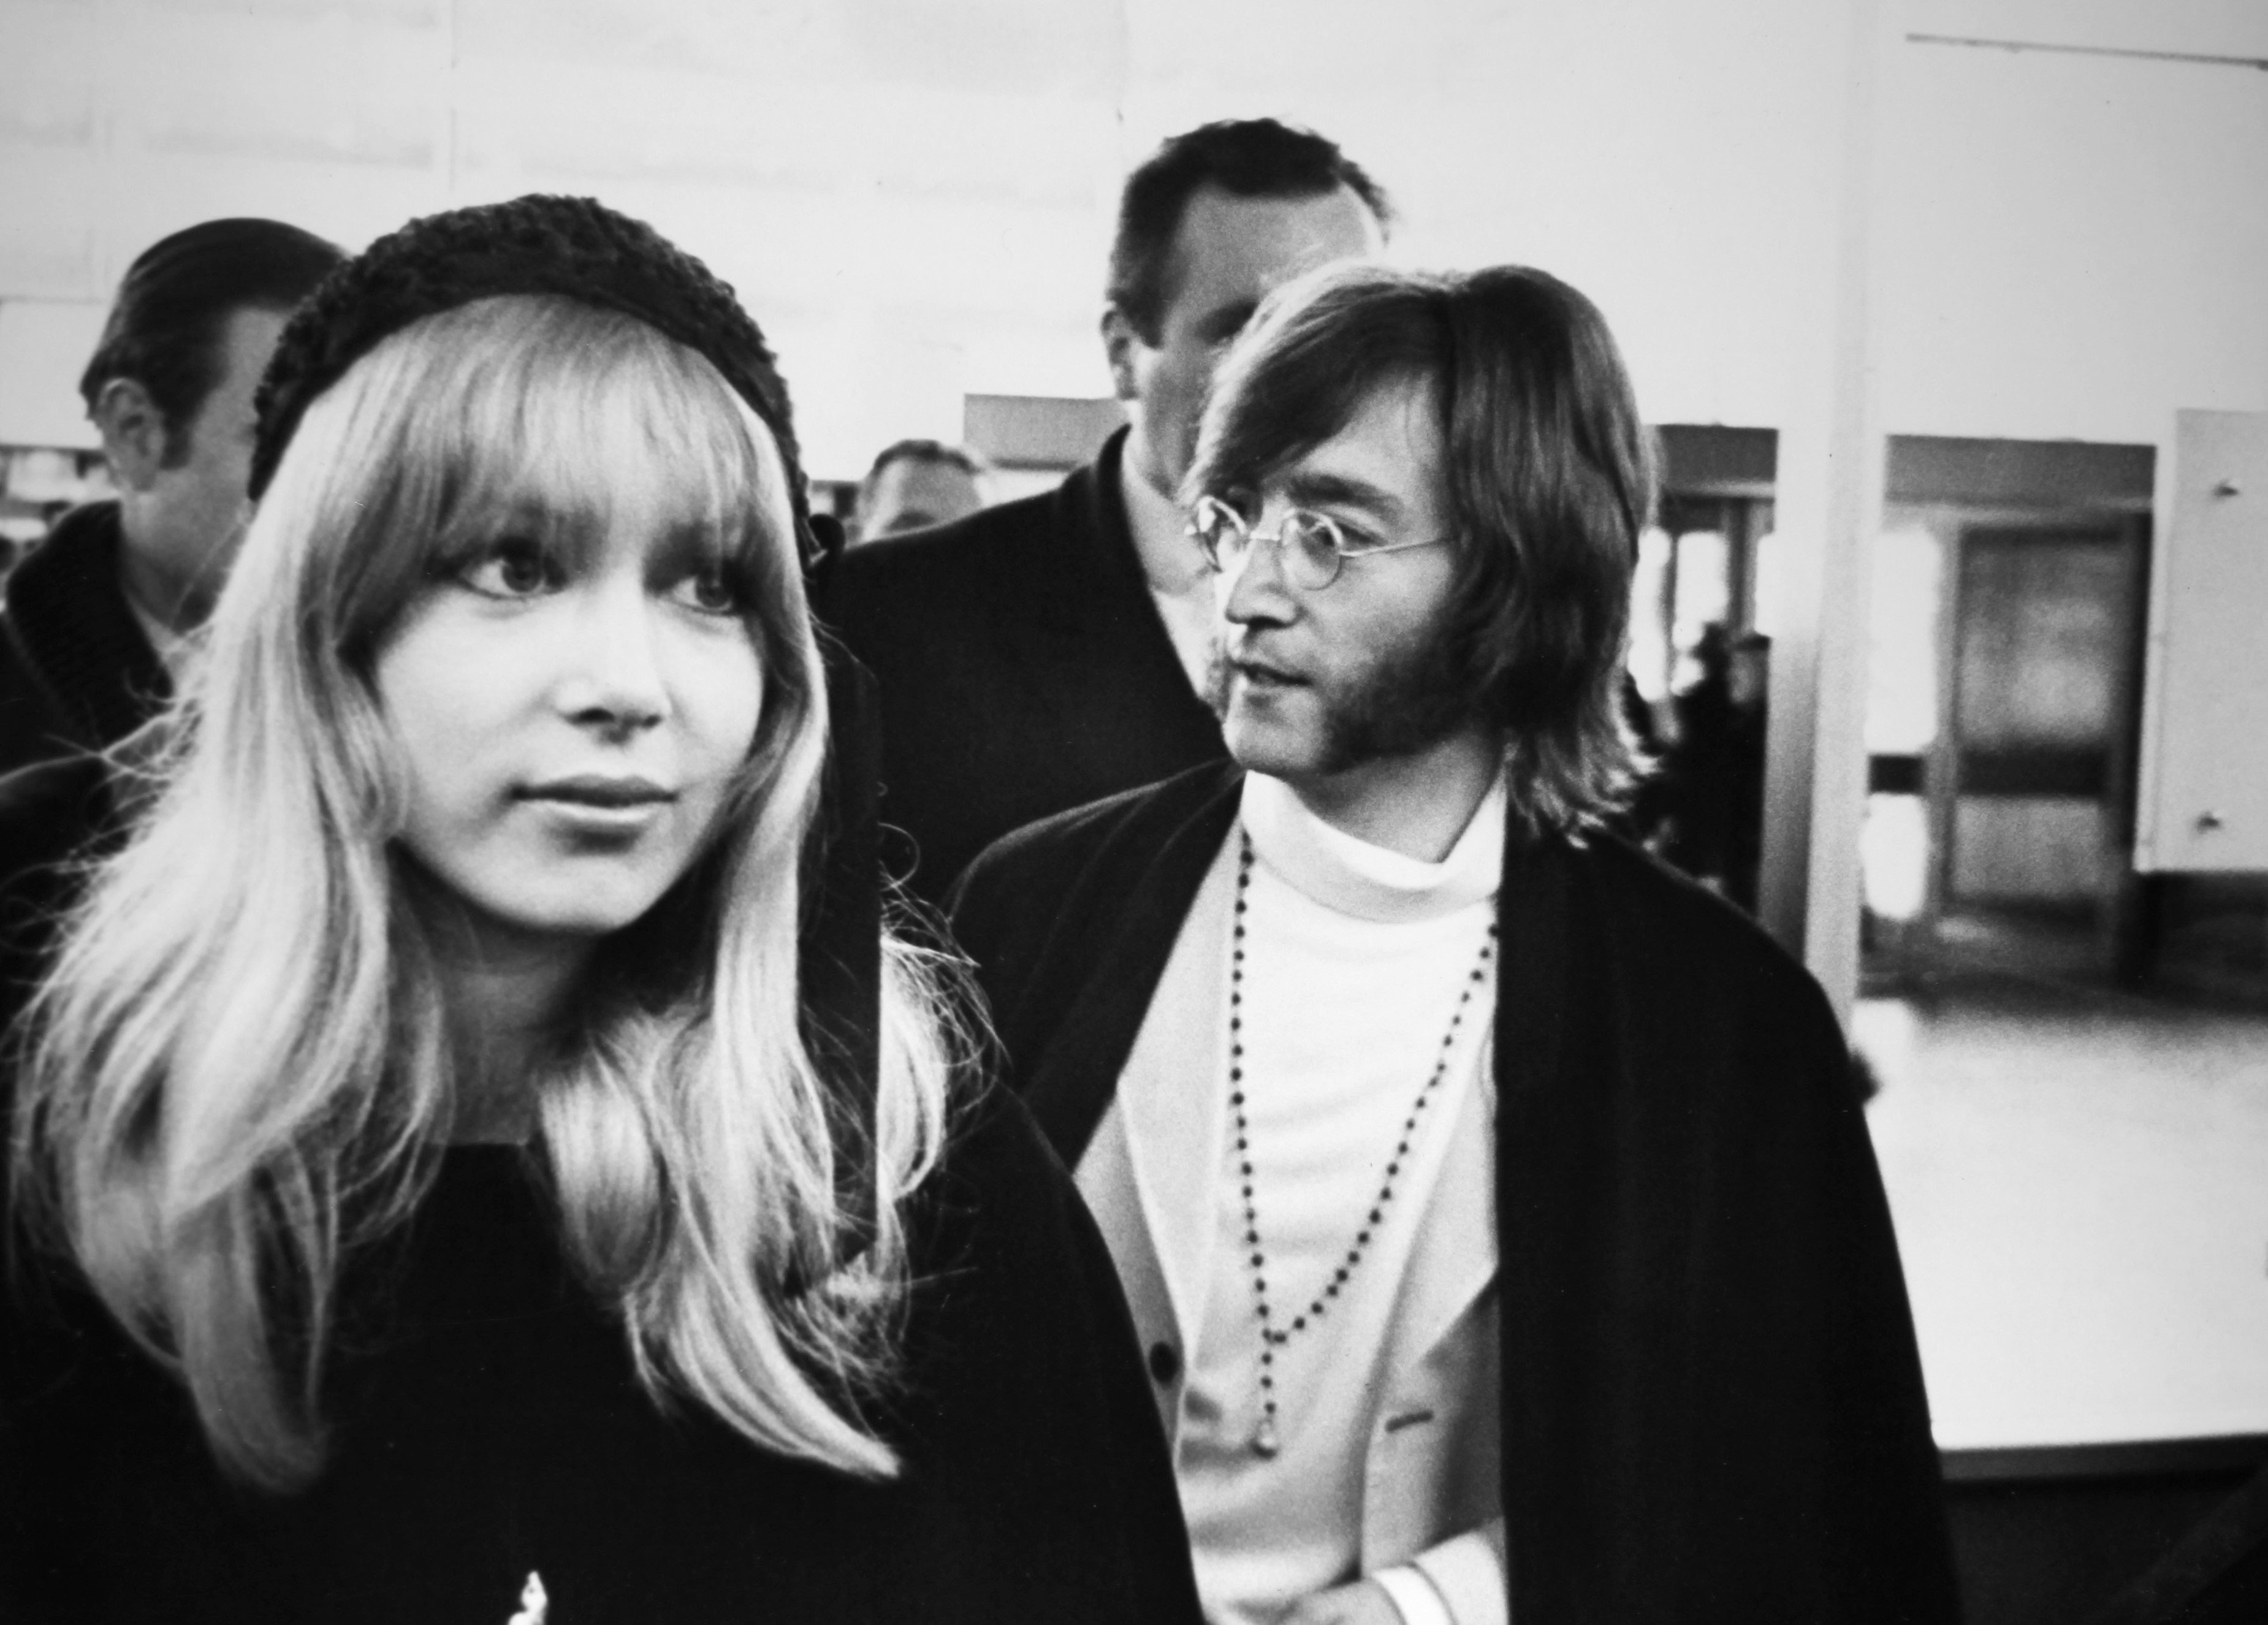 A black and white photo of George Harrison's wife Pattie Boyd and John Lennon walking. 